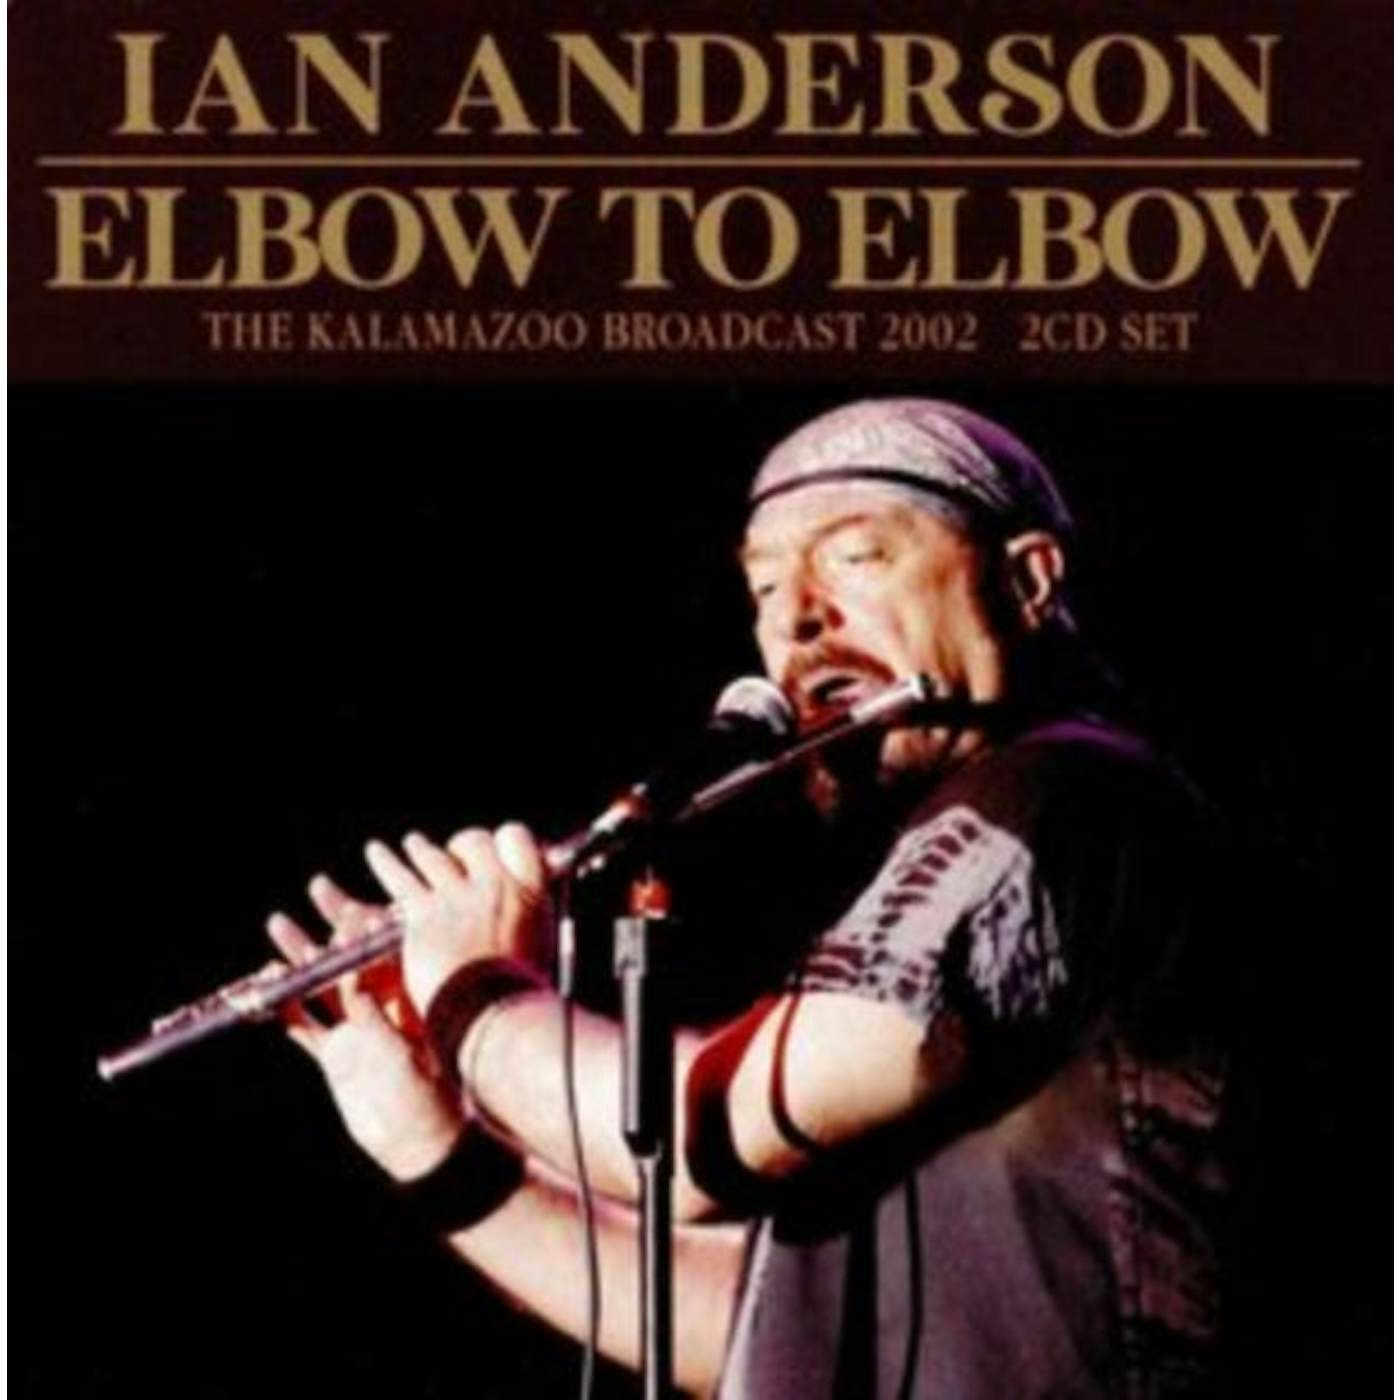 Ian Anderson CD - Elbow To Elbow (2cd)